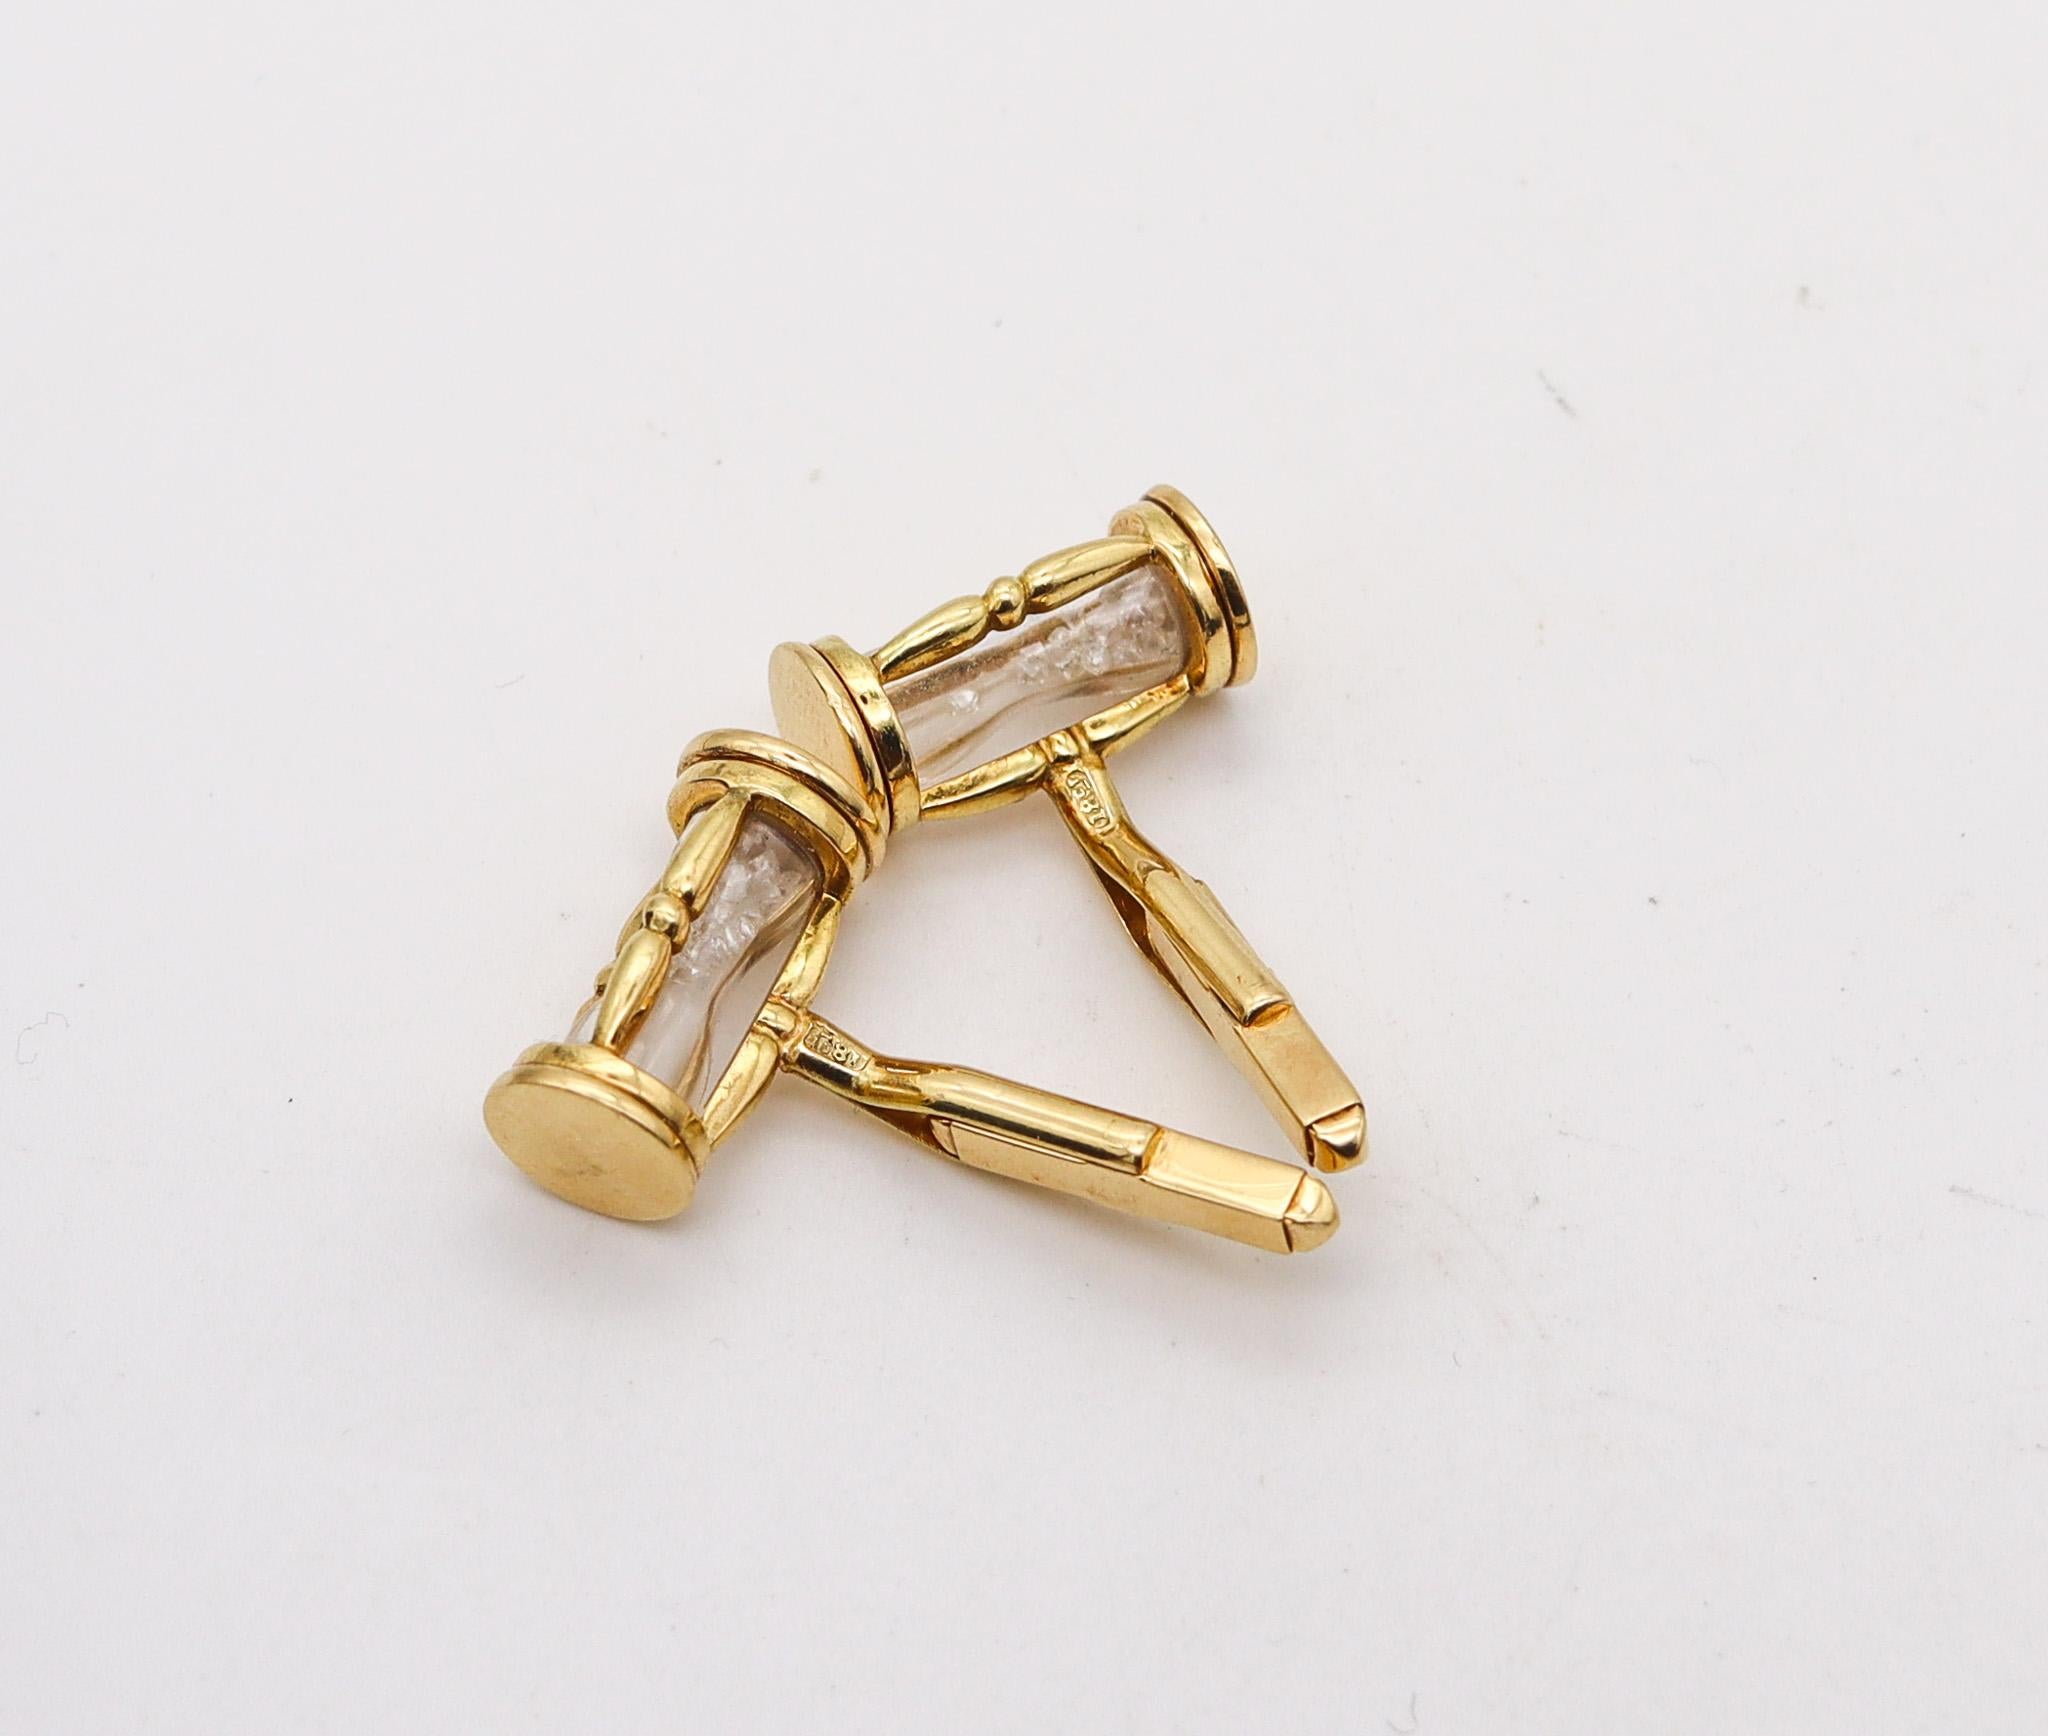 Brilliant Cut Germany Unusual Sand Clocks Cufflinks In 18Kt Yellow Gold With 1 Ctw Diamonds For Sale